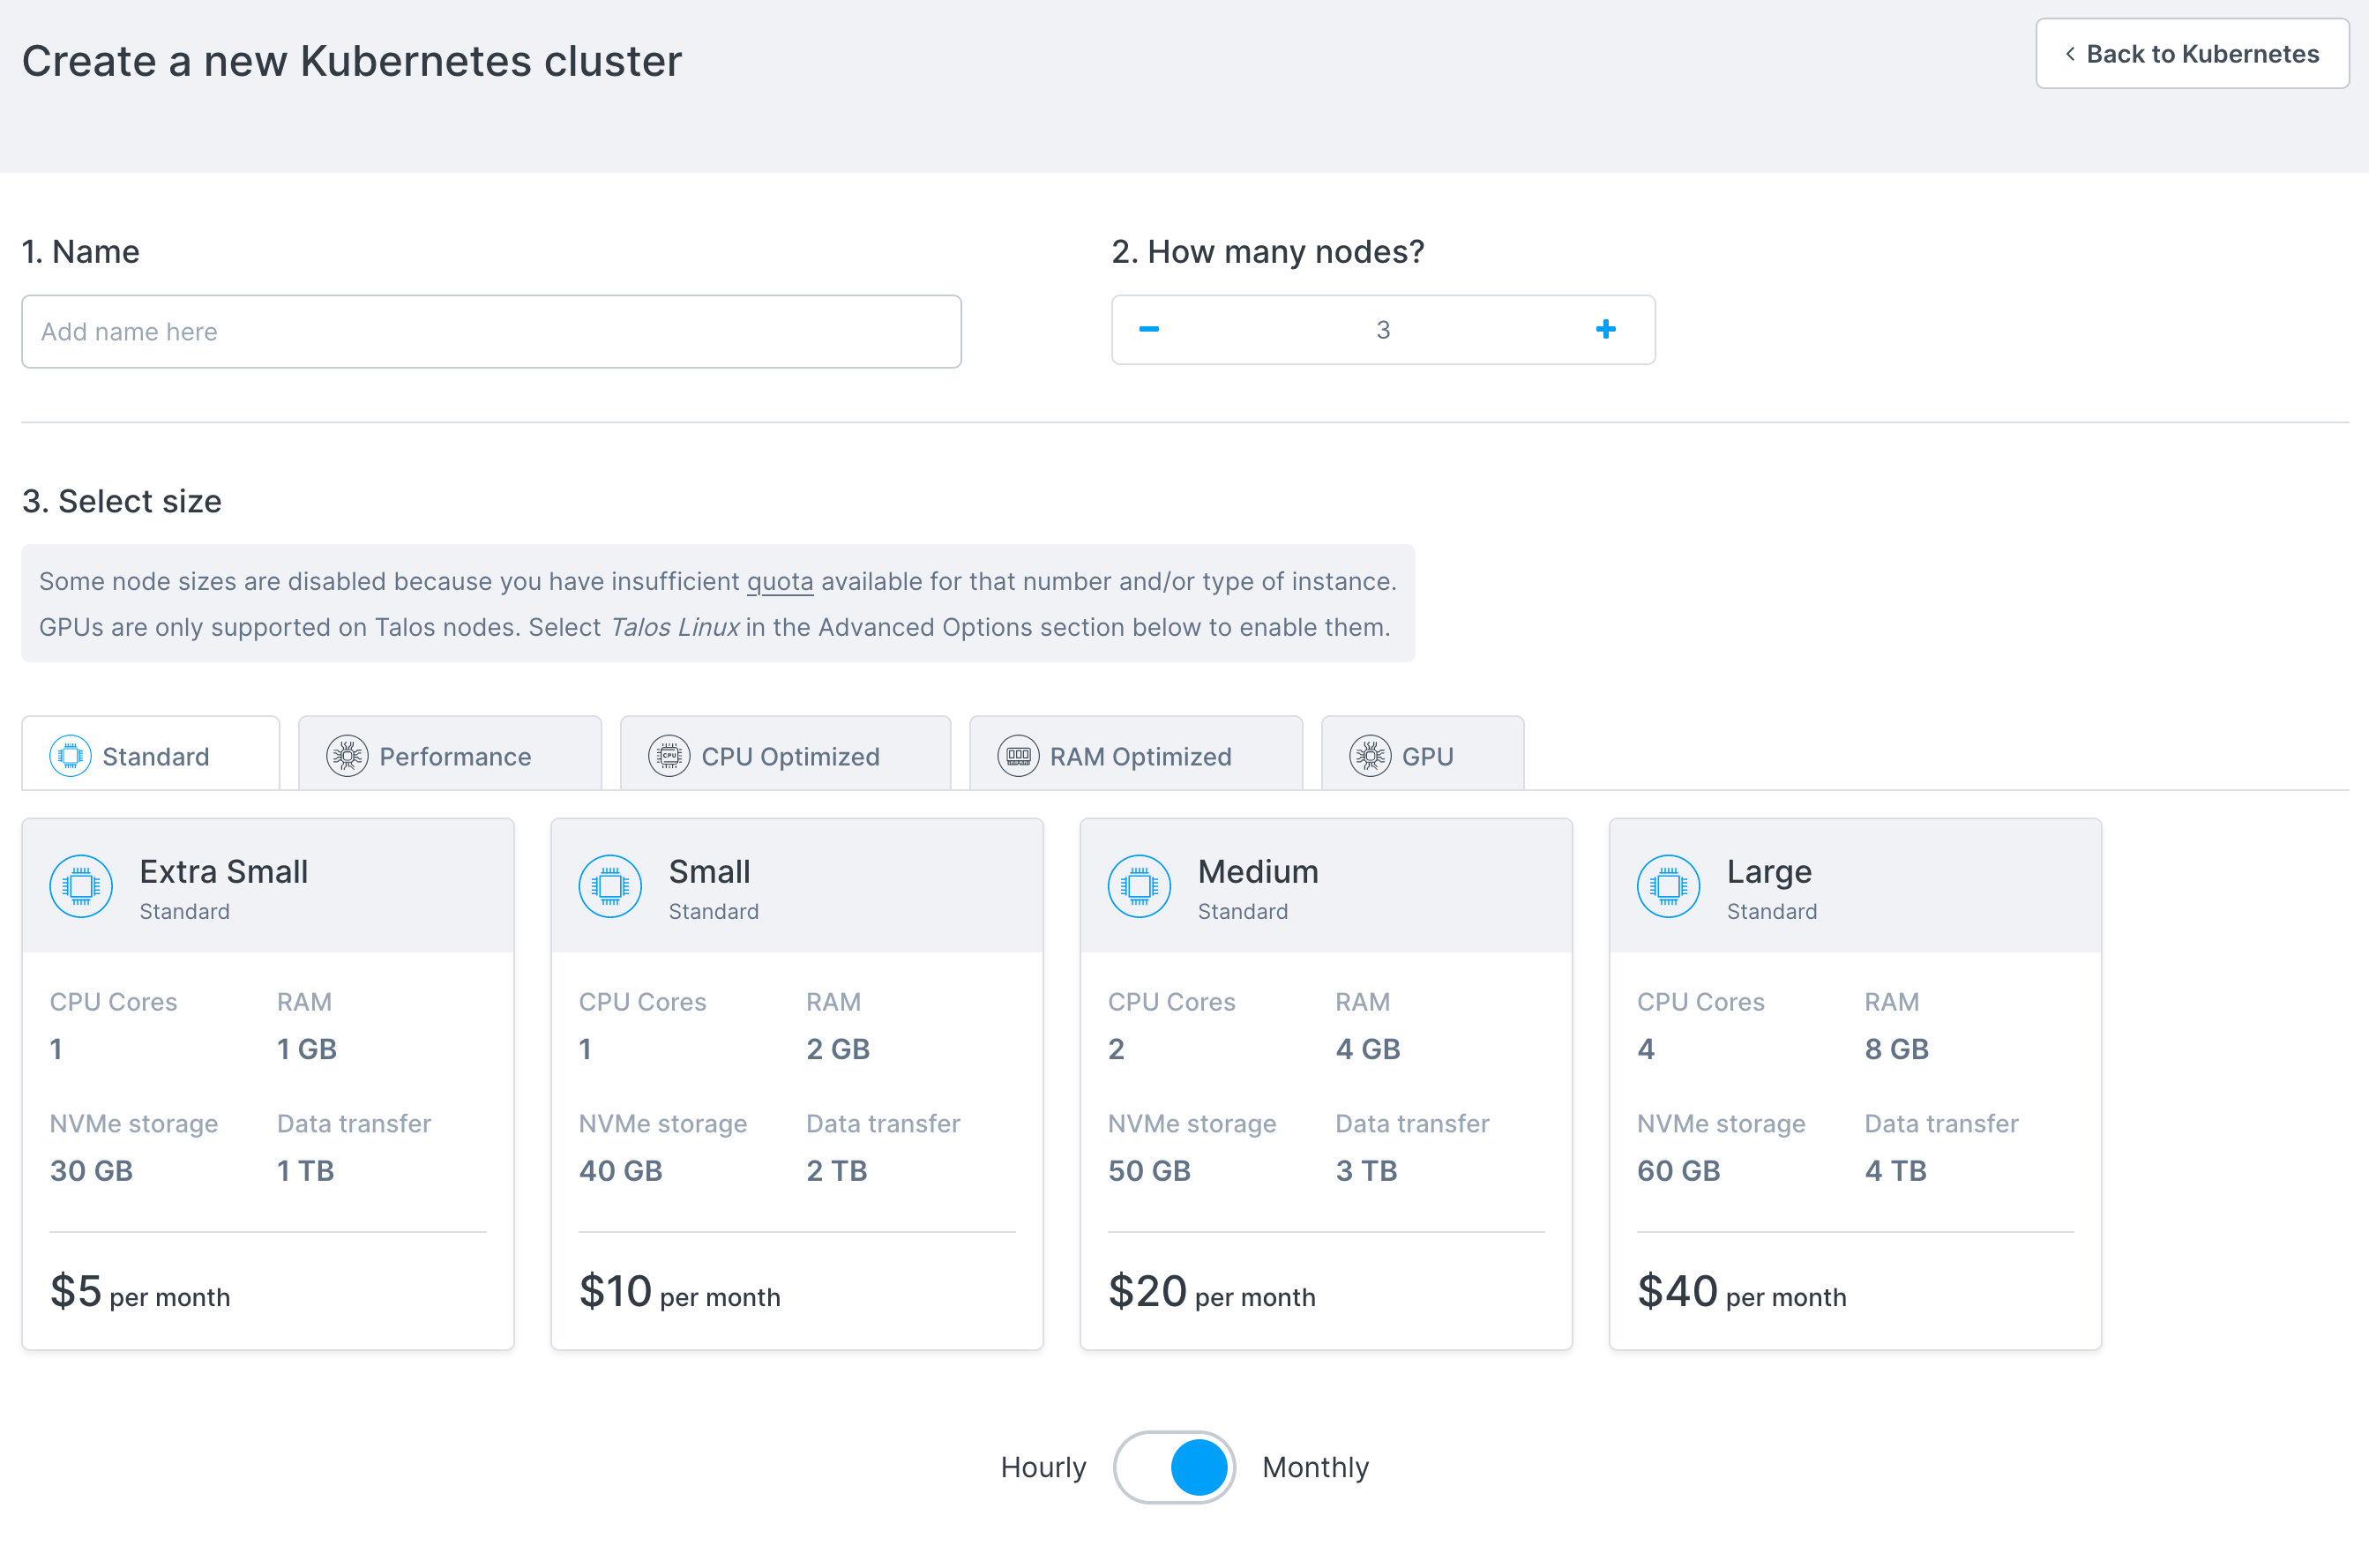 Overview of the cluster creation page on Civo